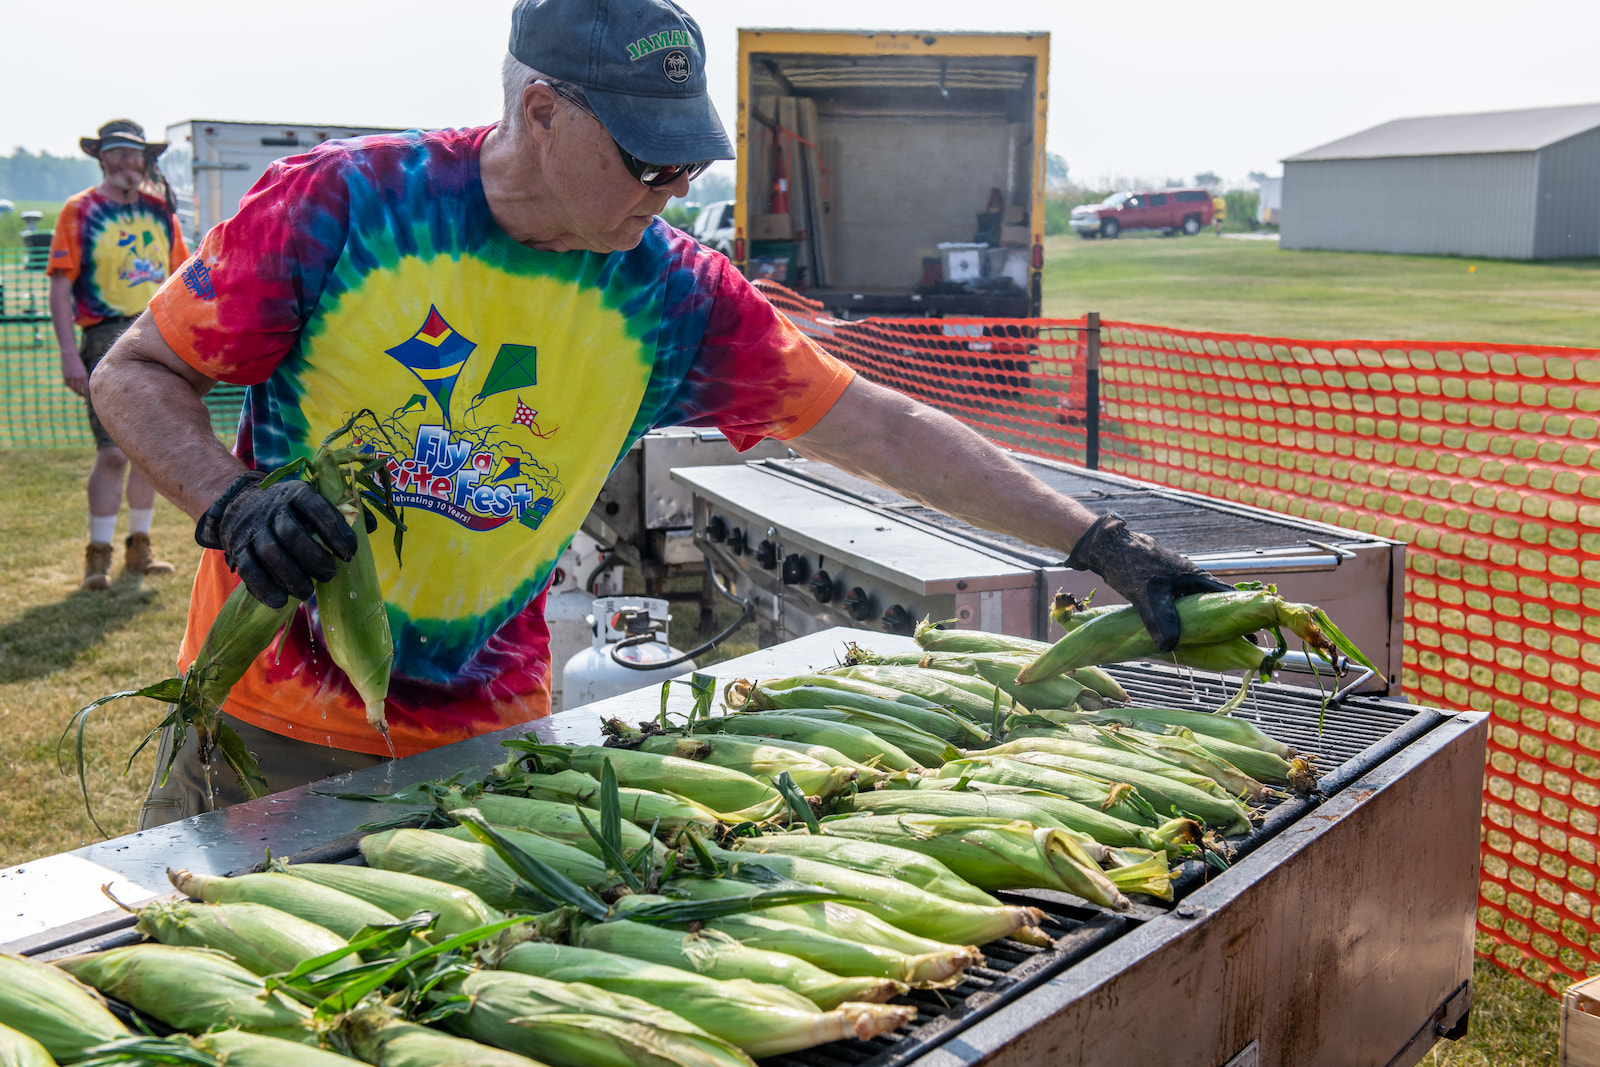 Fly a Kite Fest volunteer grilled corn on the cob